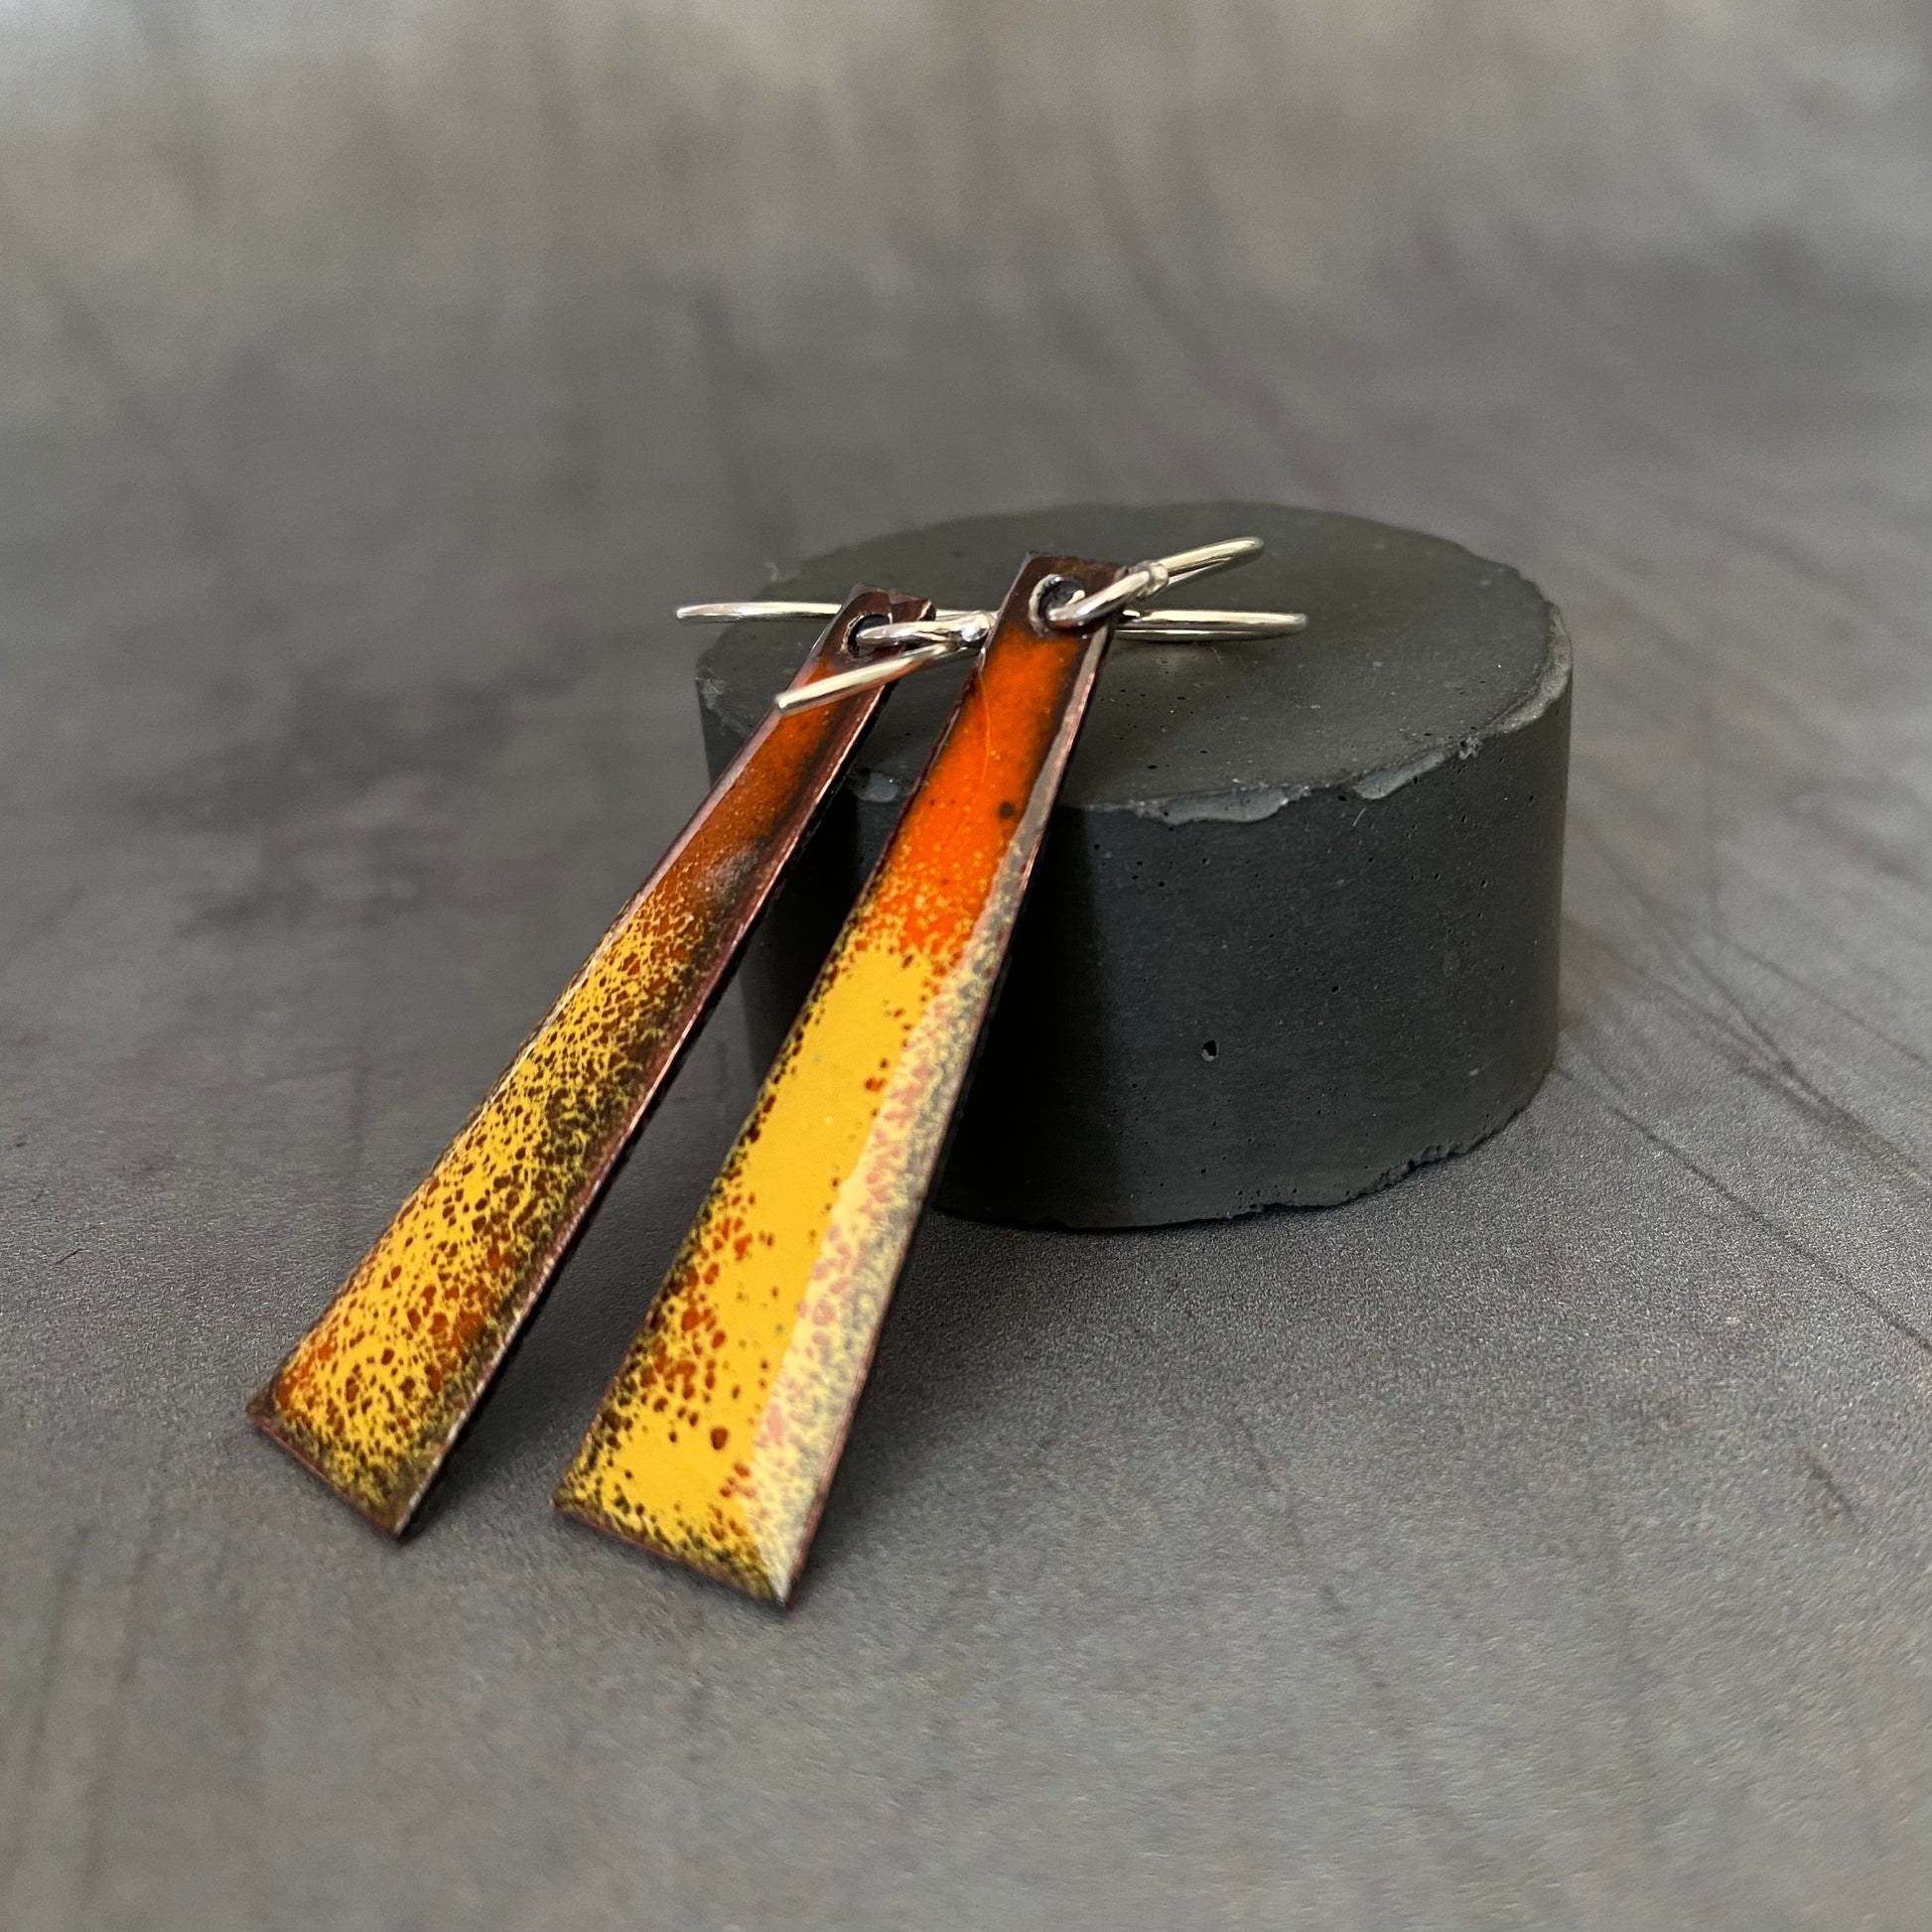 Copper enamel dnagly triangle earrings in yellow and orange - MaisyPlum